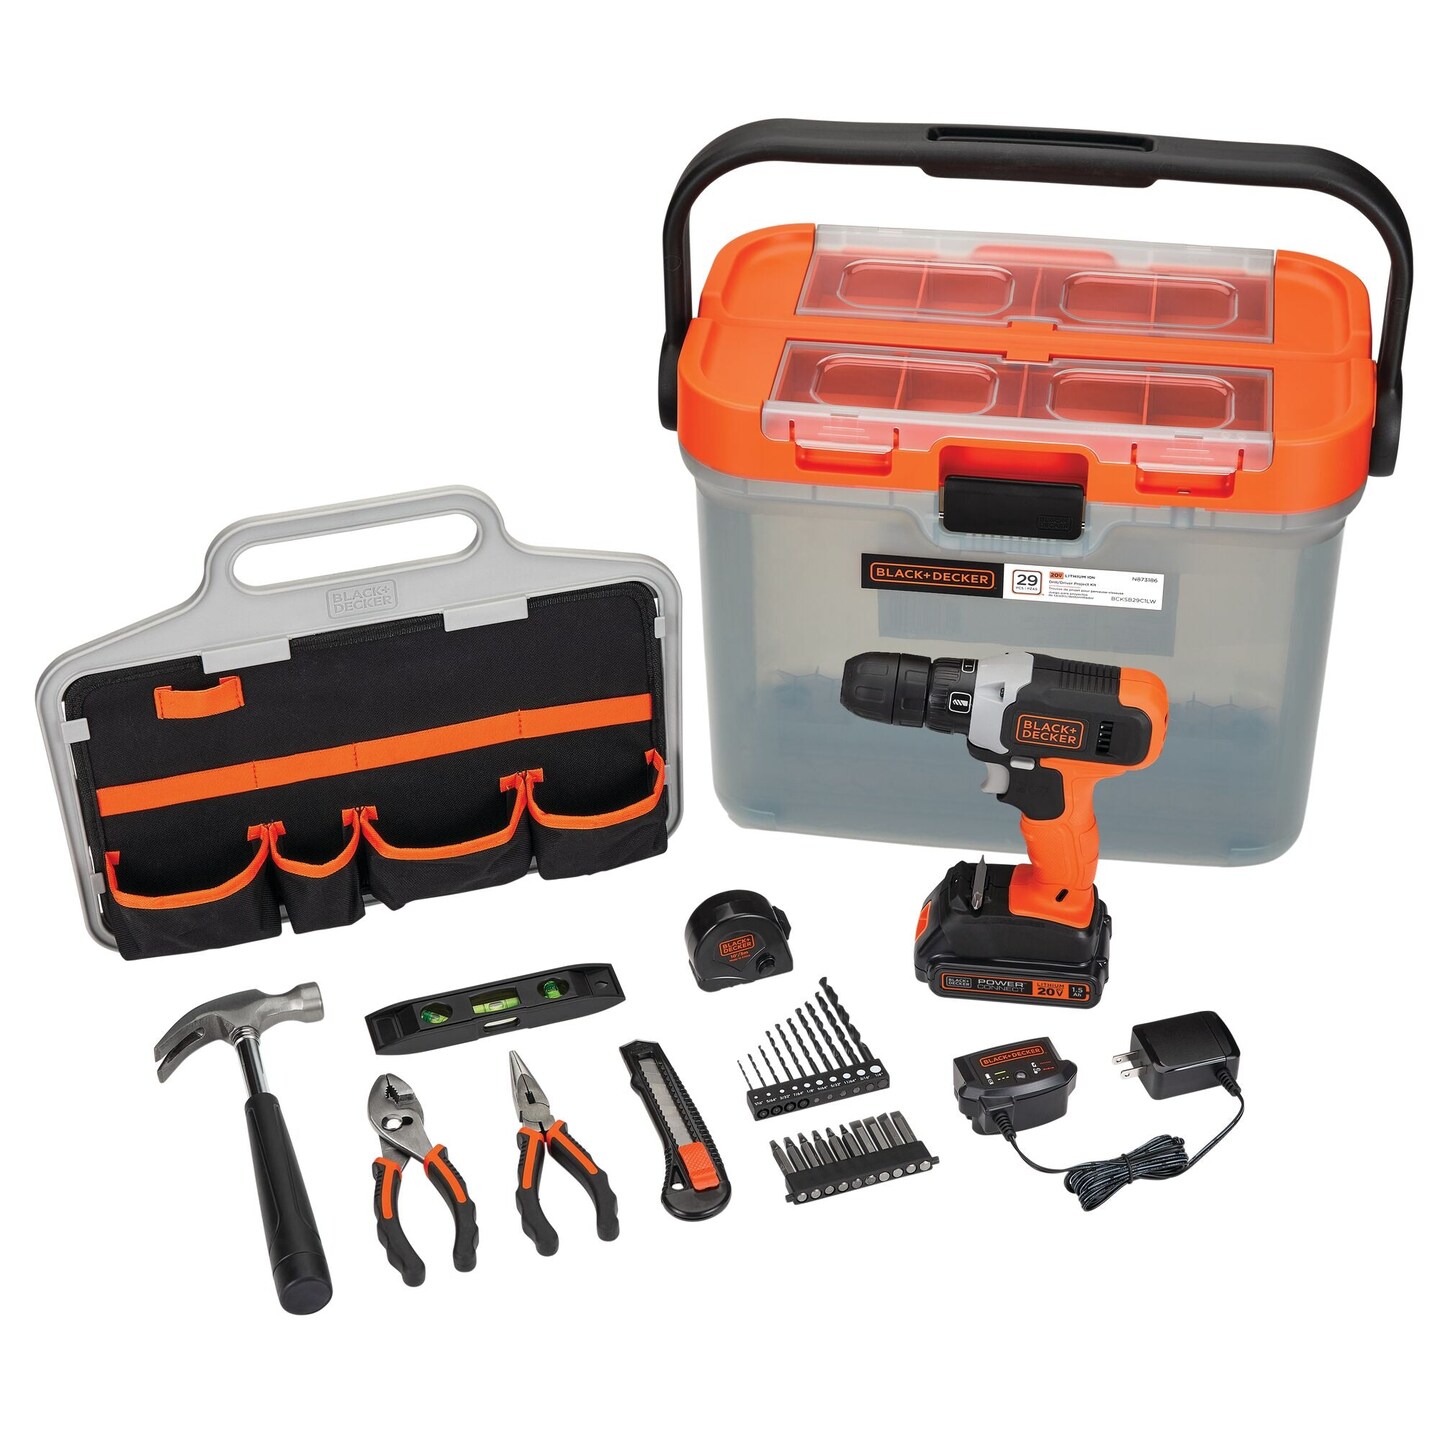 BLACK+DECKER 20V MAX* Cordless Drill With 28-Piece Home Project Kit (BCKSB29C1)